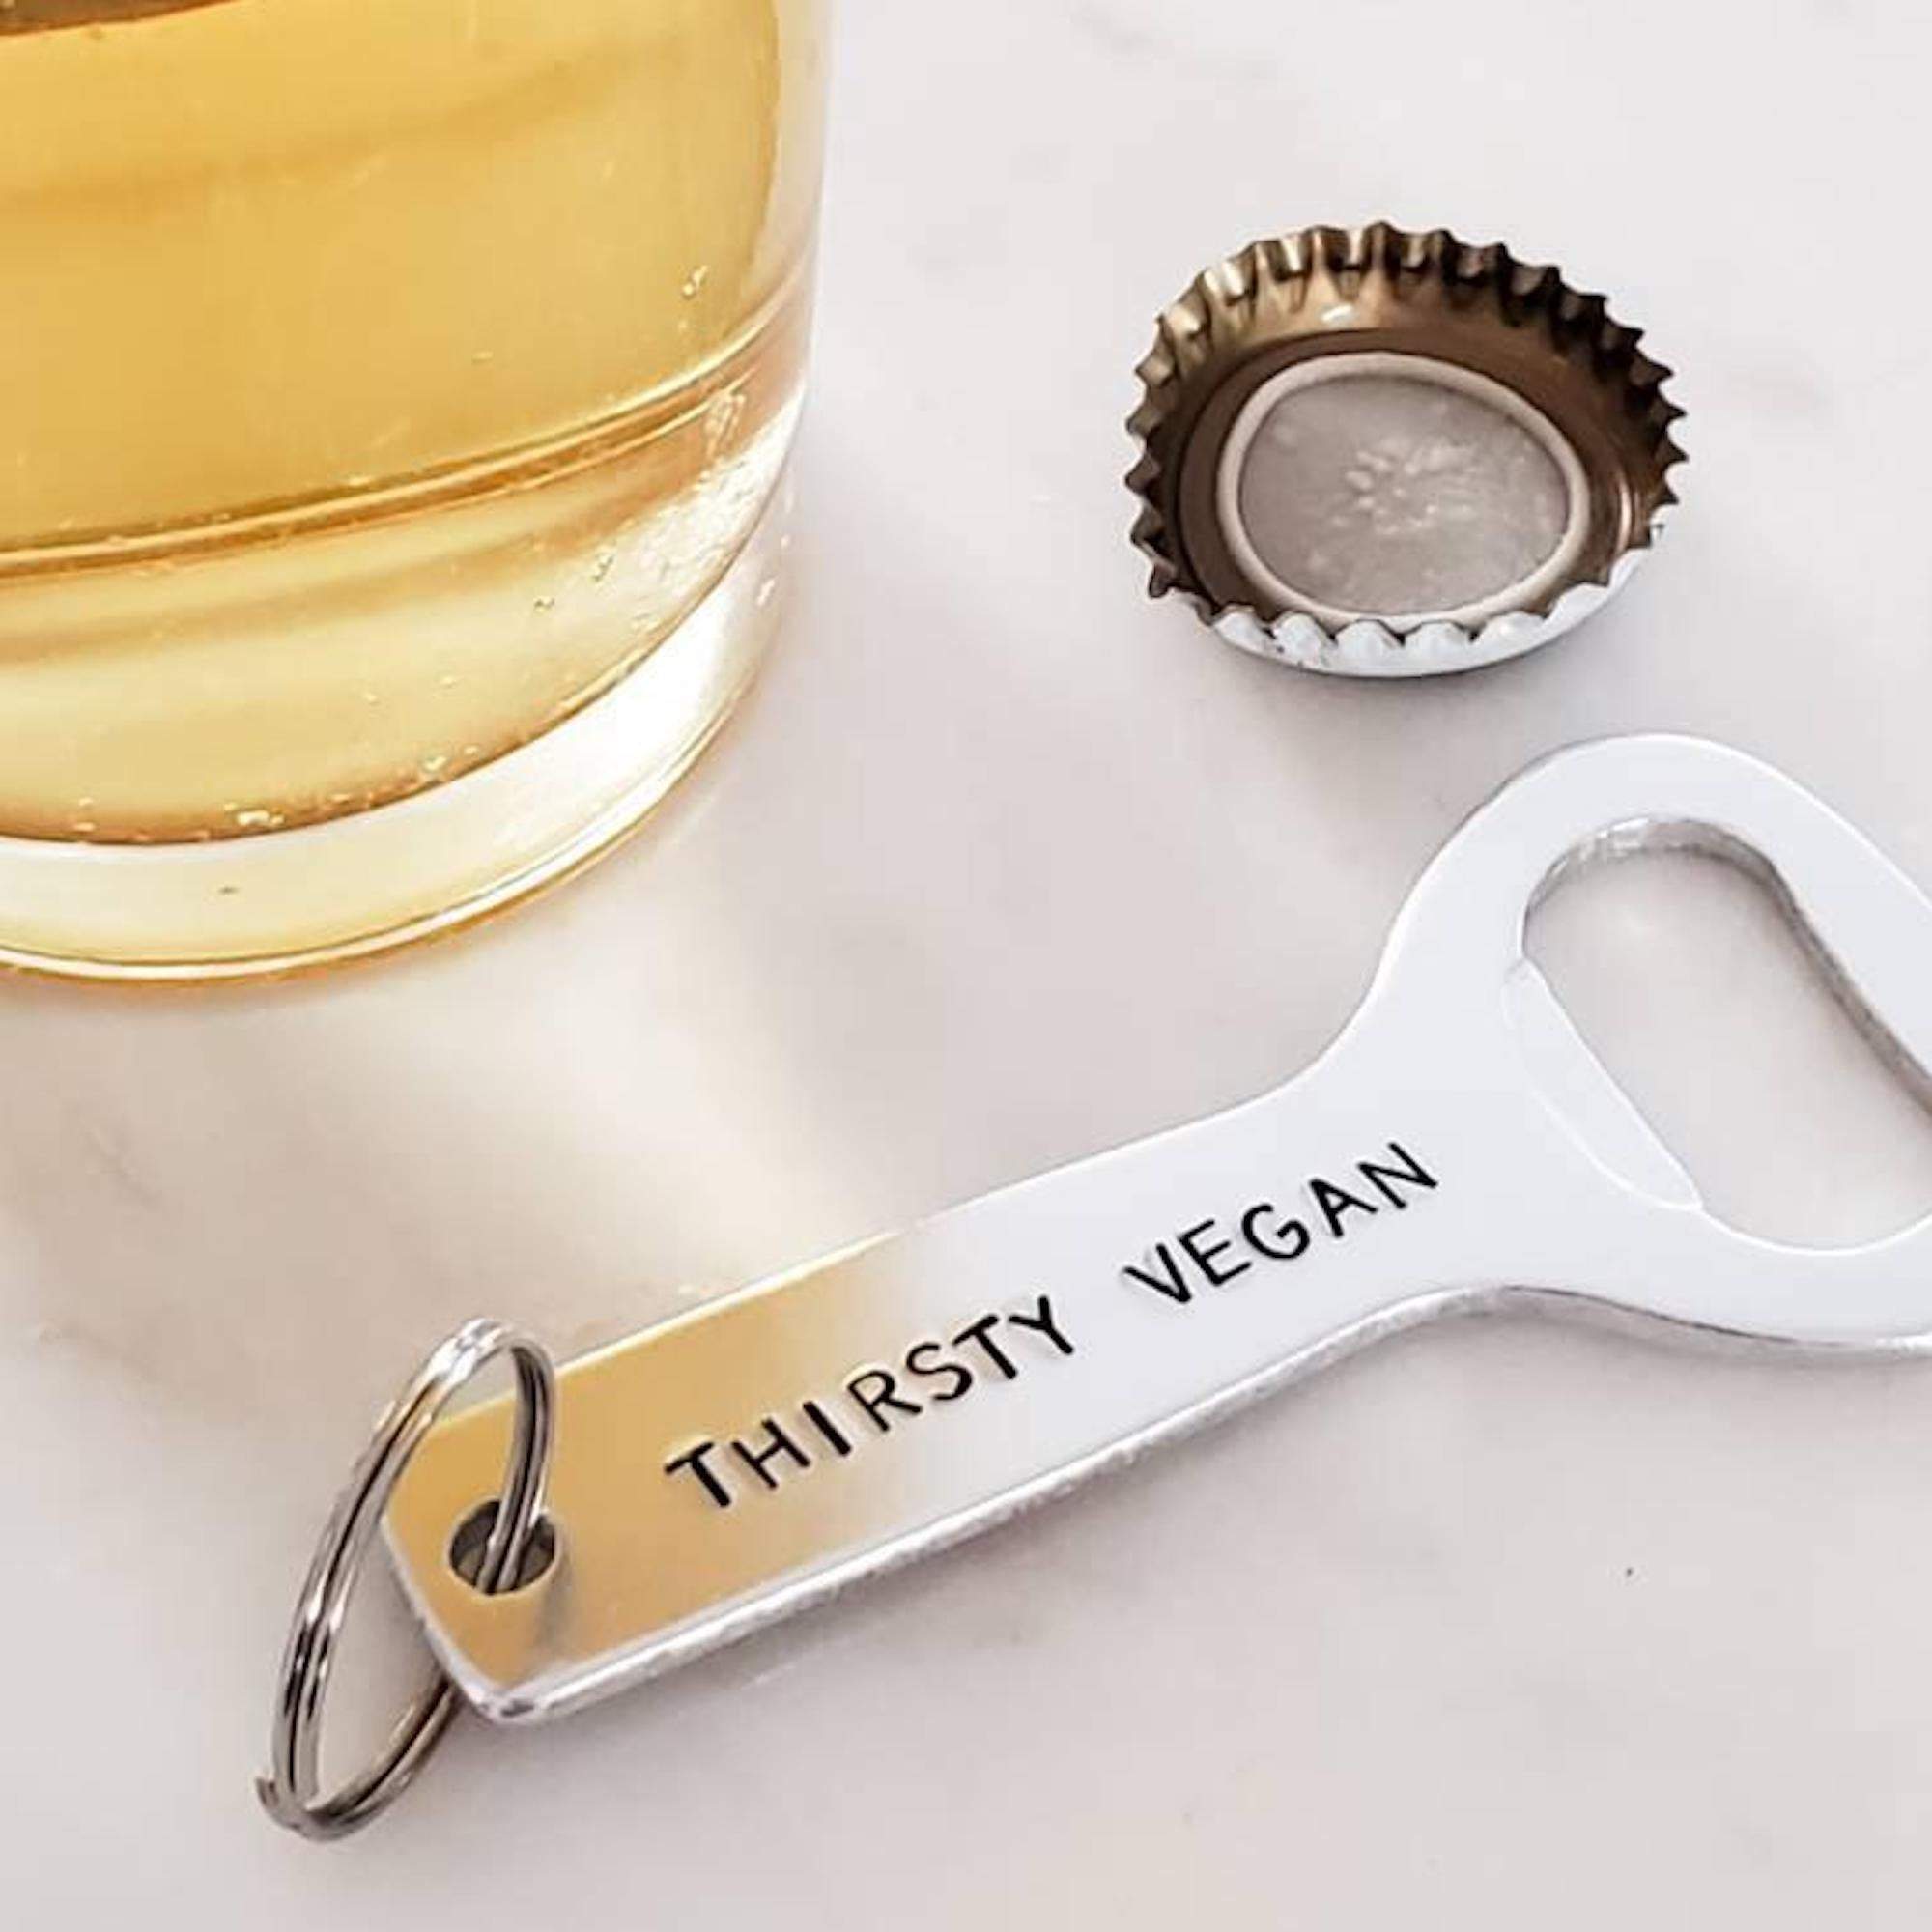 DON'T BE A DICK Bottle Opener Keychain Salt and Sparkle